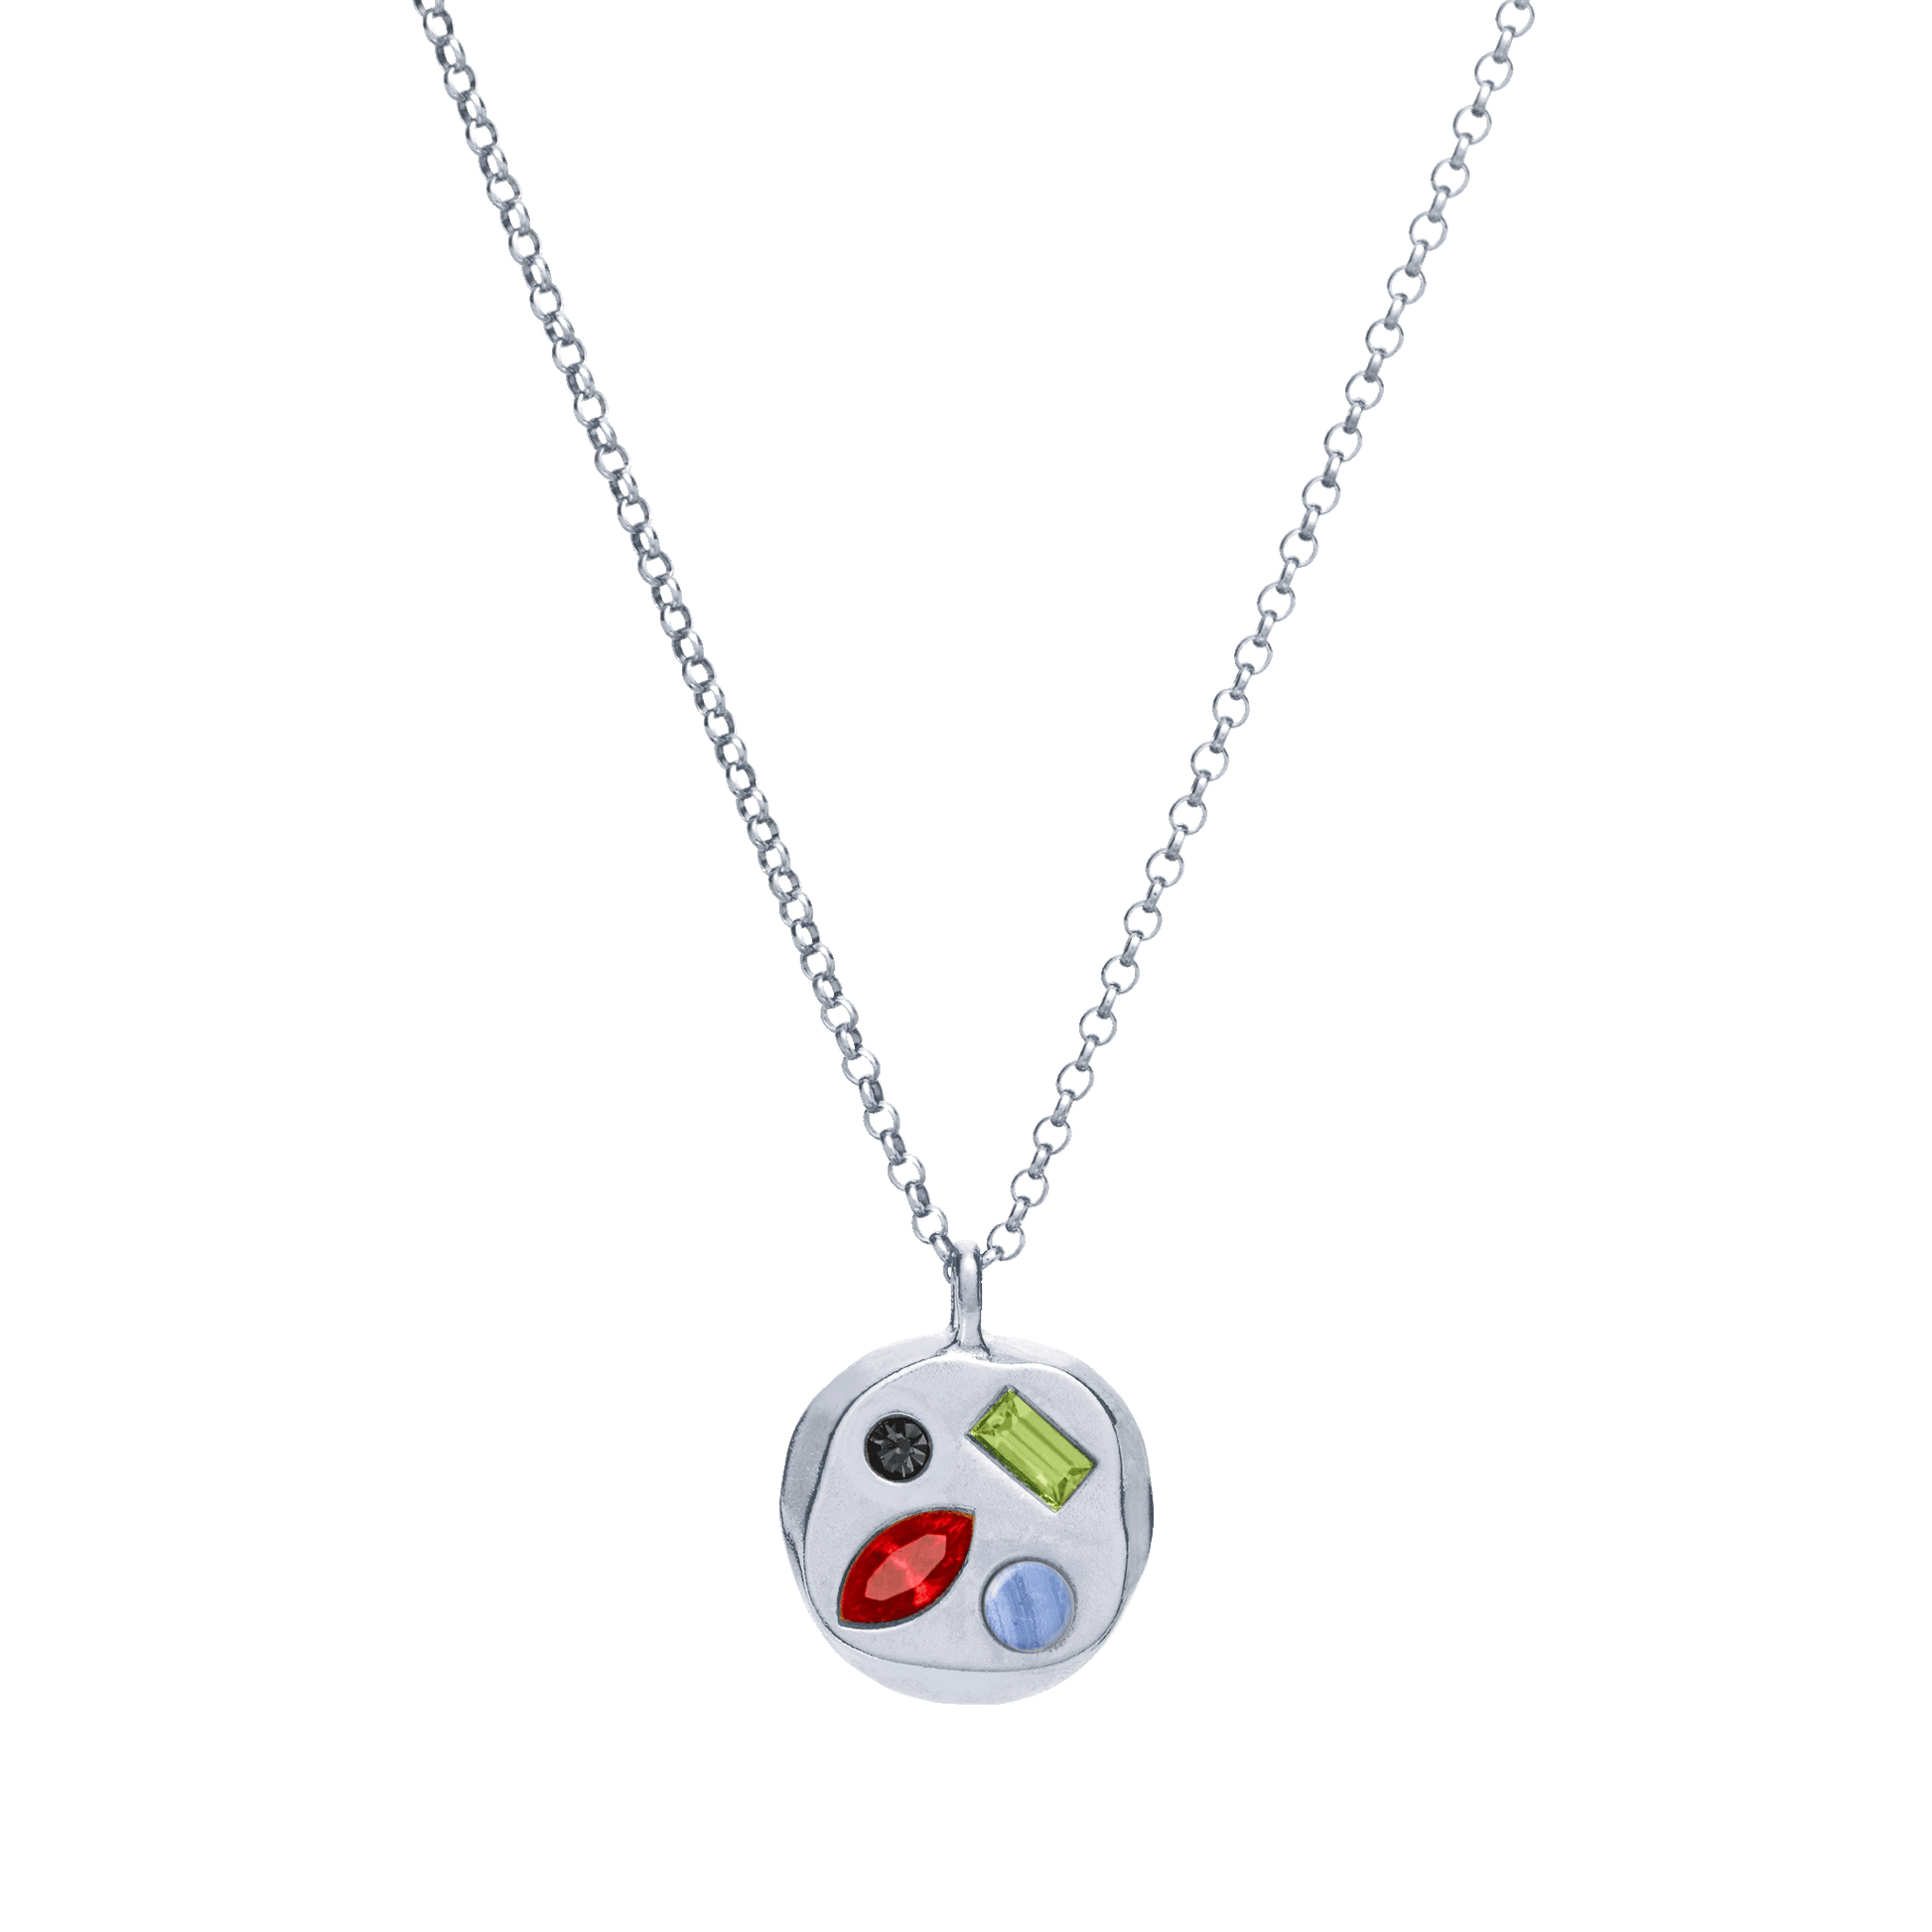 The July Fifth Pendant in Sterling Silver